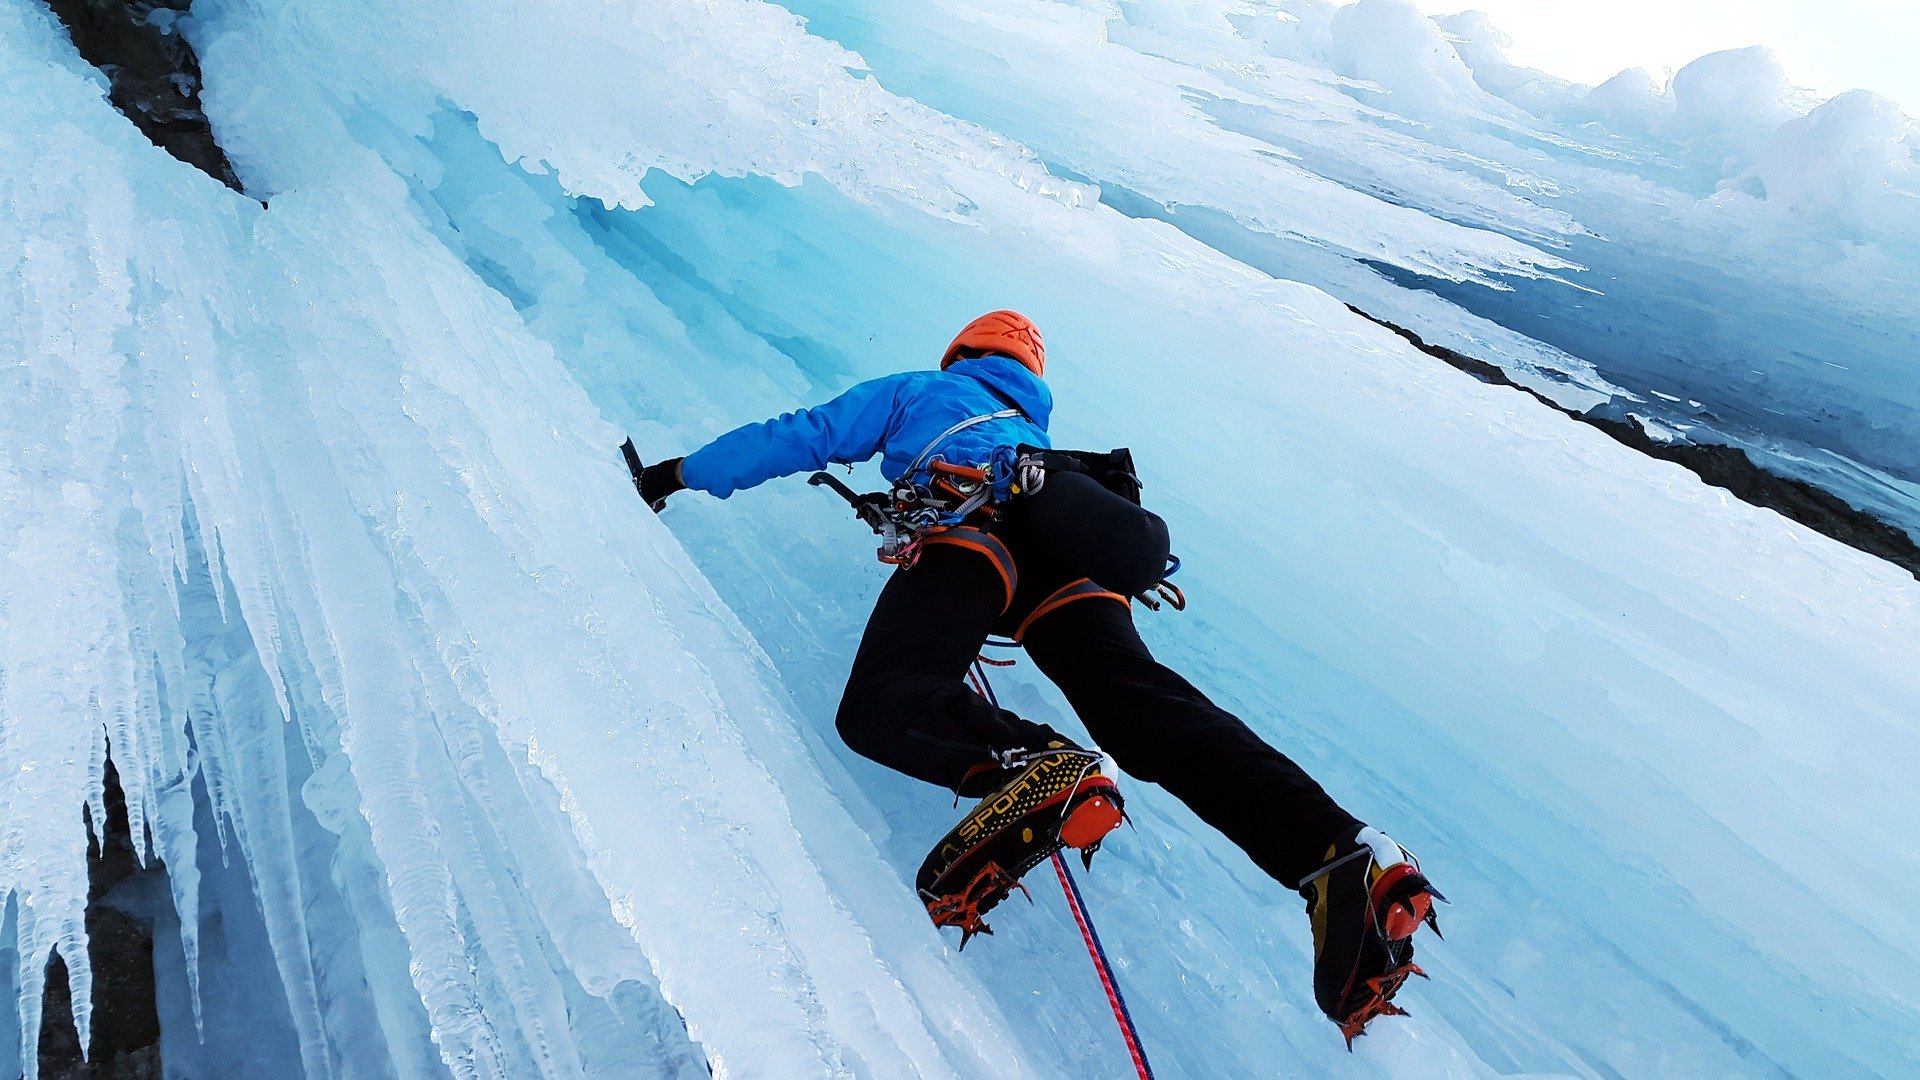 6 Extreme Sports You Might Not Have Heard Of (But Should Try!)